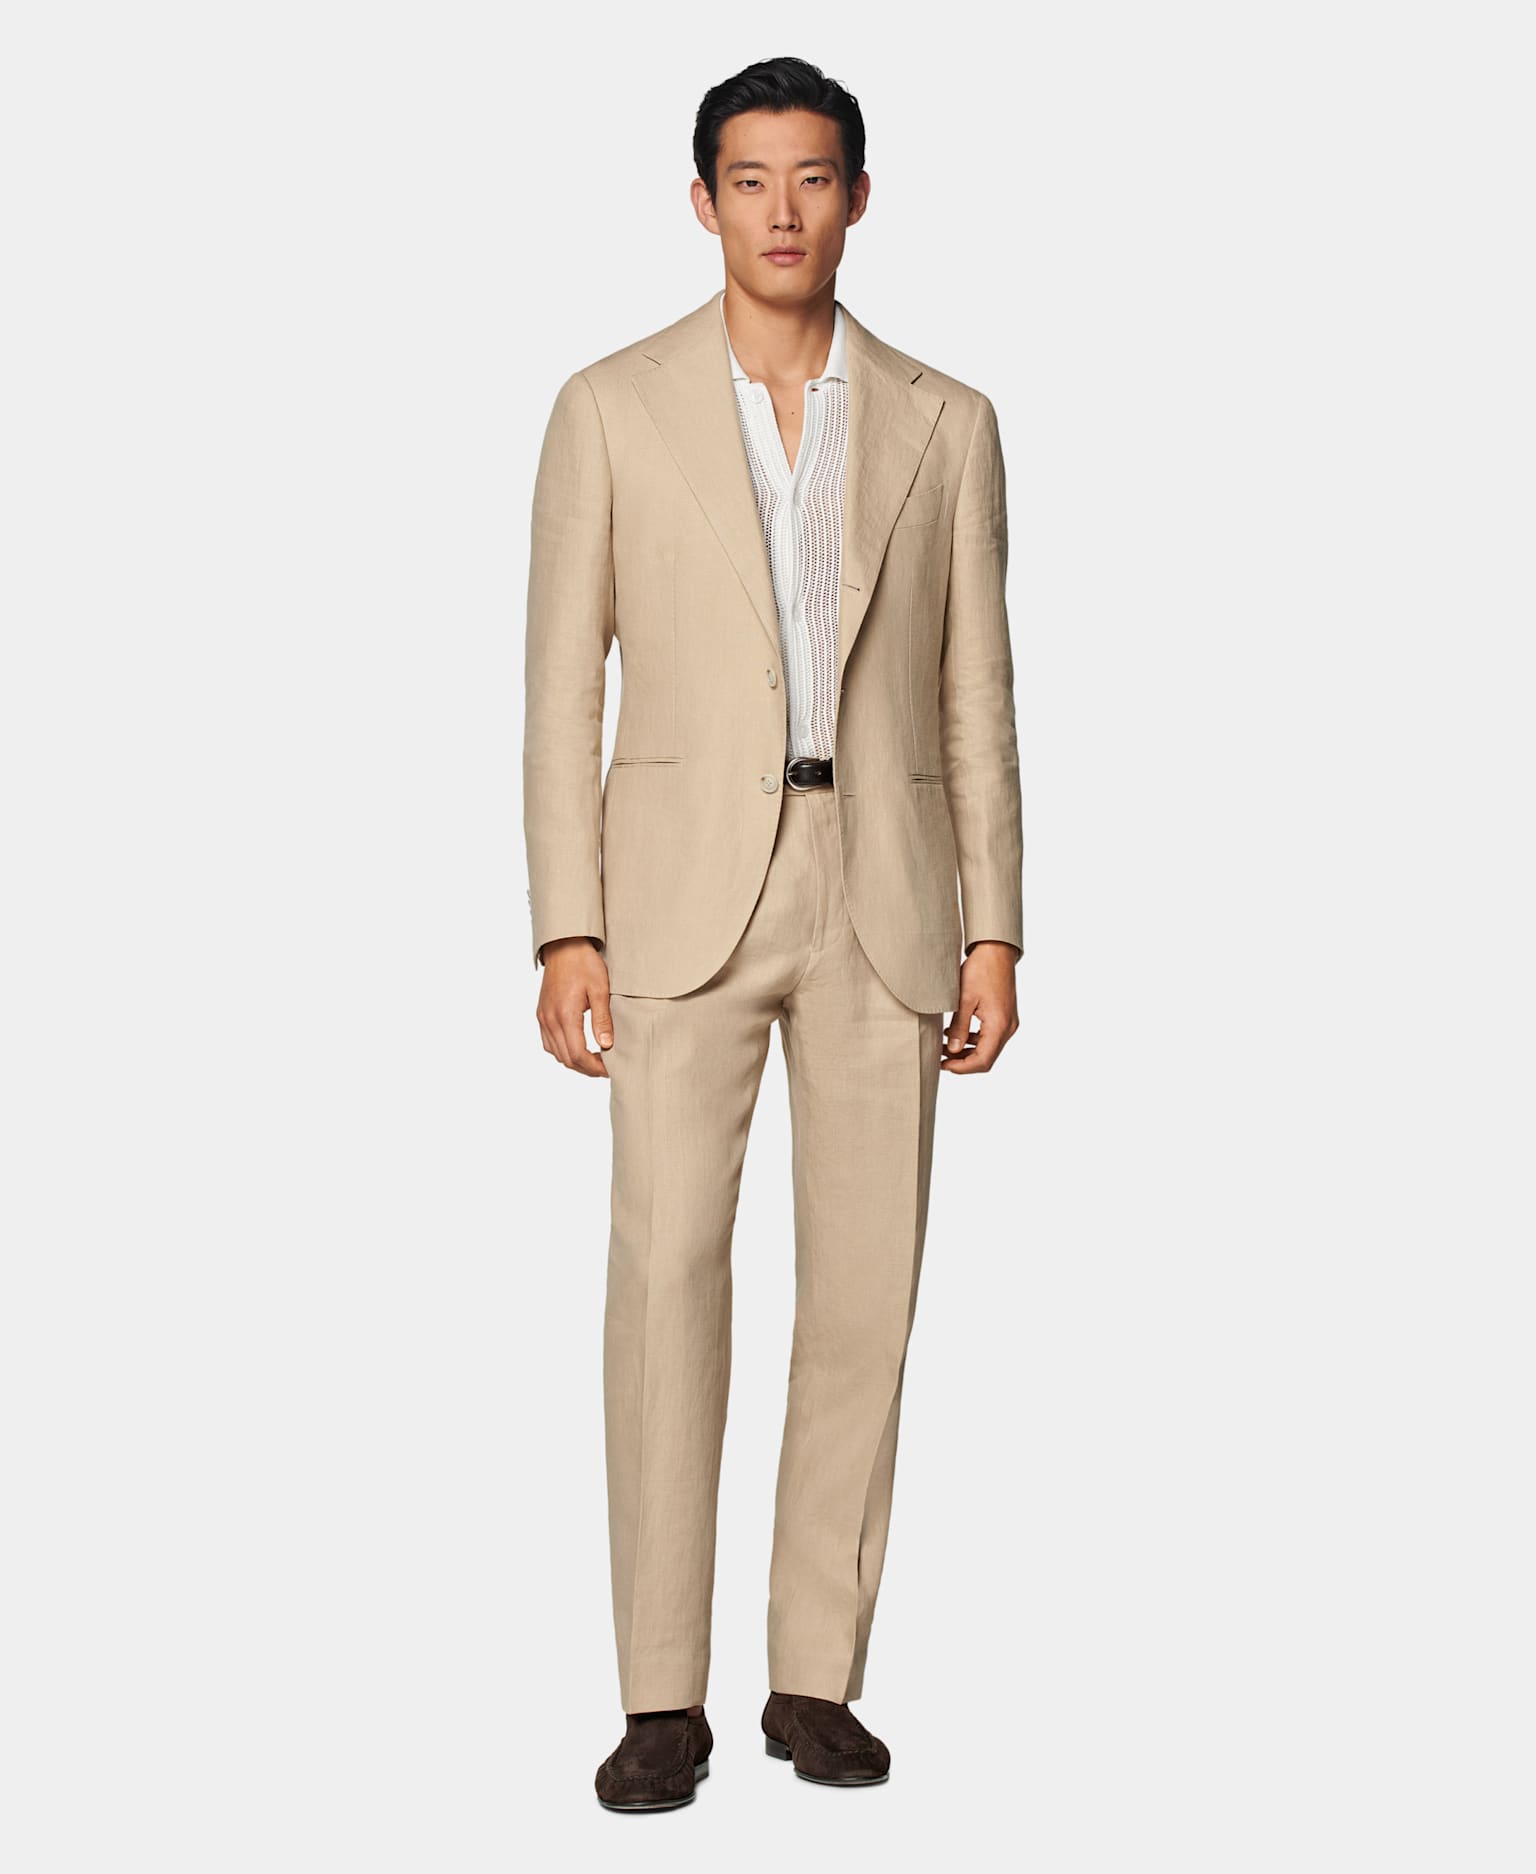 Light brown suit with off-white crocheted  knit, black leather belt and suede loafers.